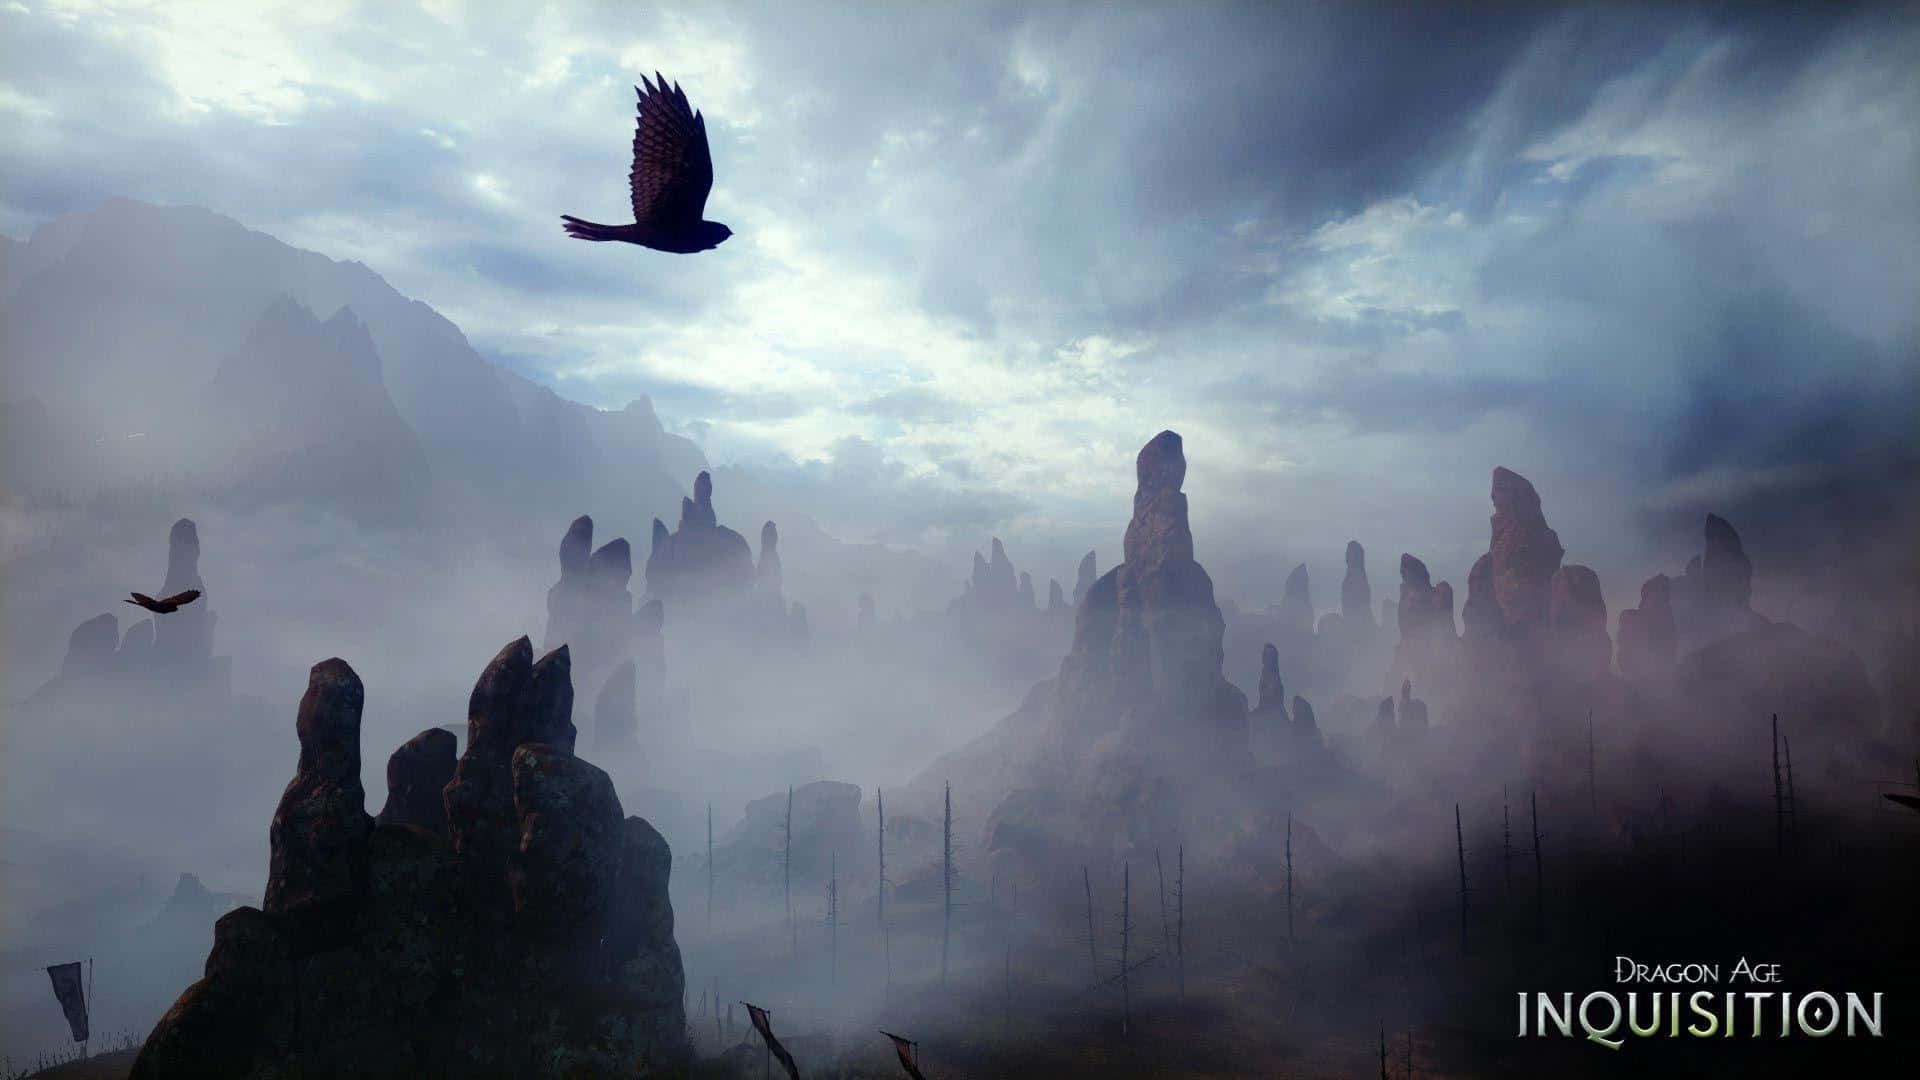 Immerse yourself in the world of Dragon Age Inquisition